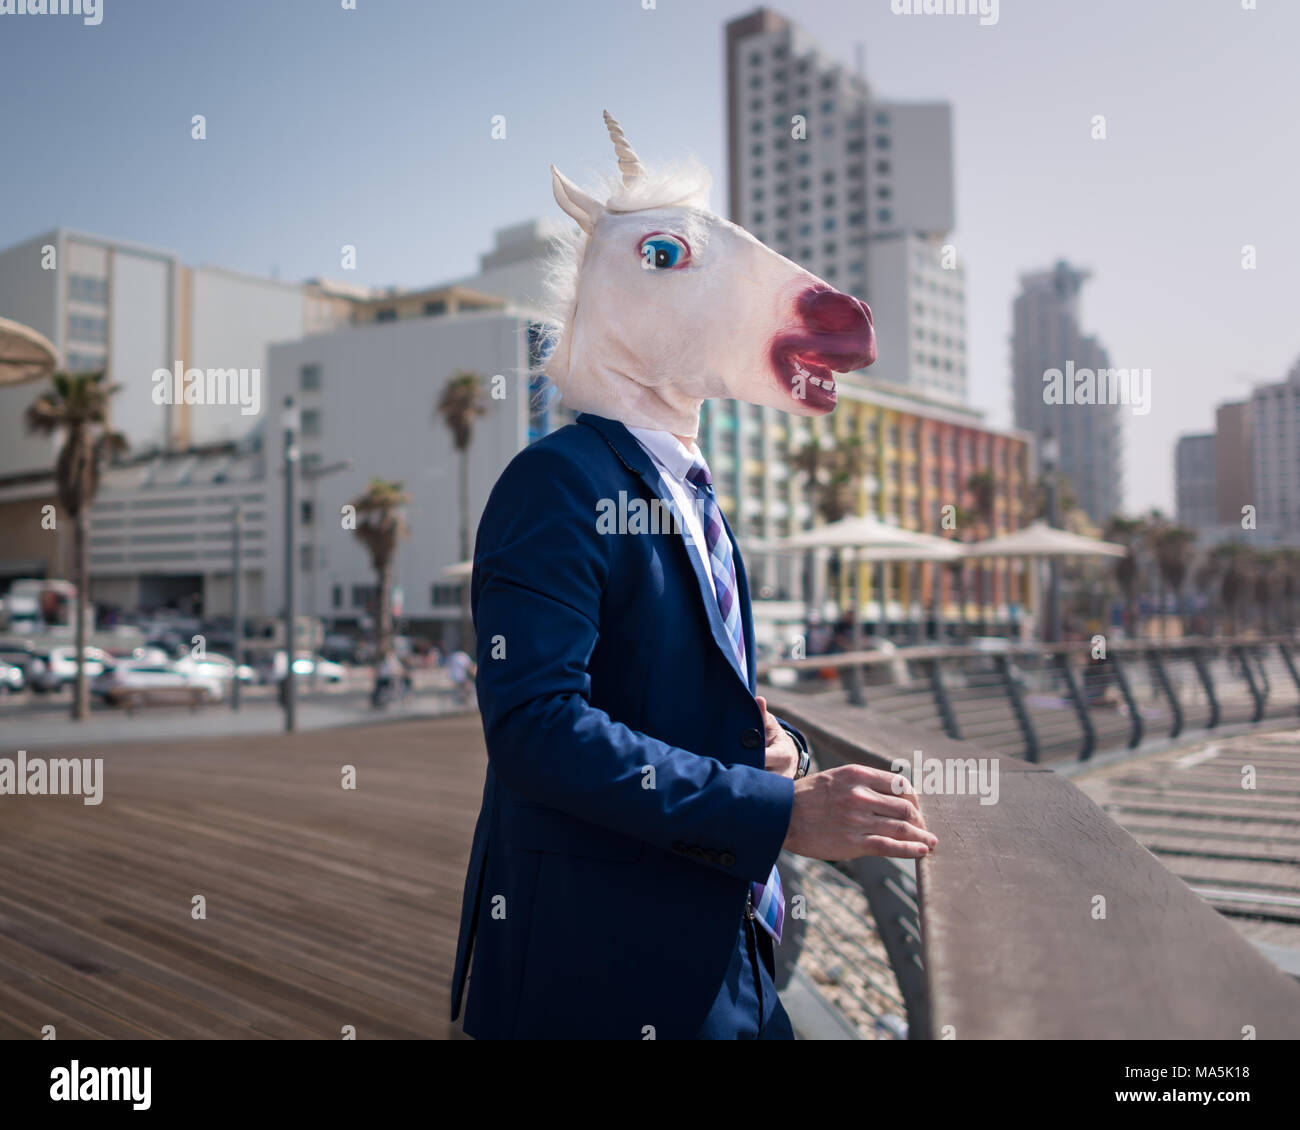 Unusual manager in funny mask and suit stands on city promenade. Young stylish man on the background of cityscape. Unicorn relaxes in warm sunny day Stock Photo